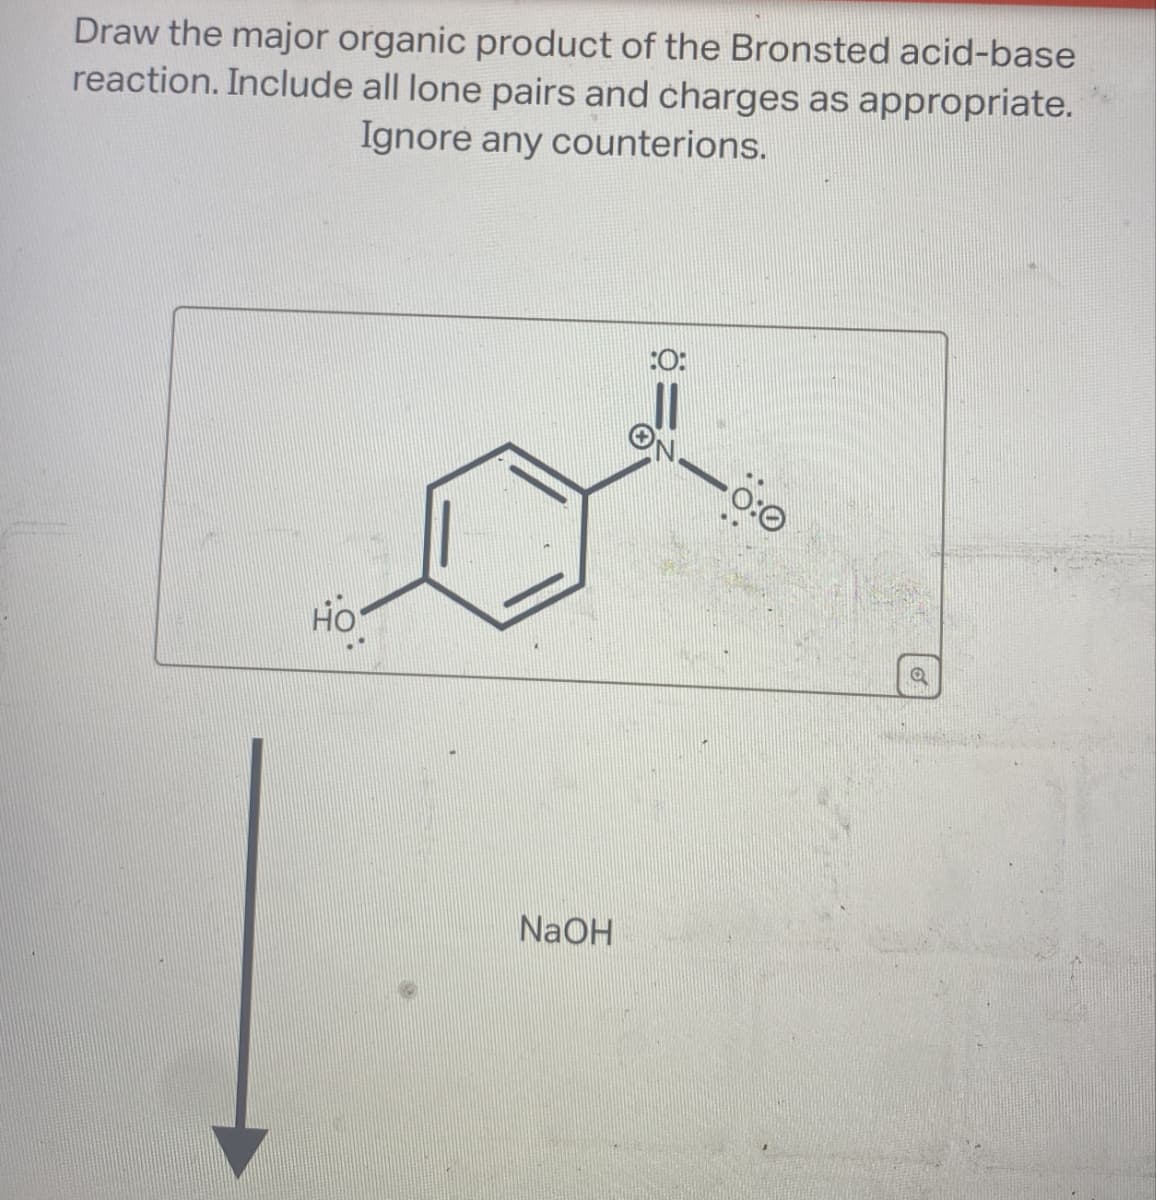 Draw the major organic product of the Bronsted acid-base
reaction. Include all lone pairs and charges as appropriate.
Ignore any counterions.
HO
:0:
8=
0:0
NaOH